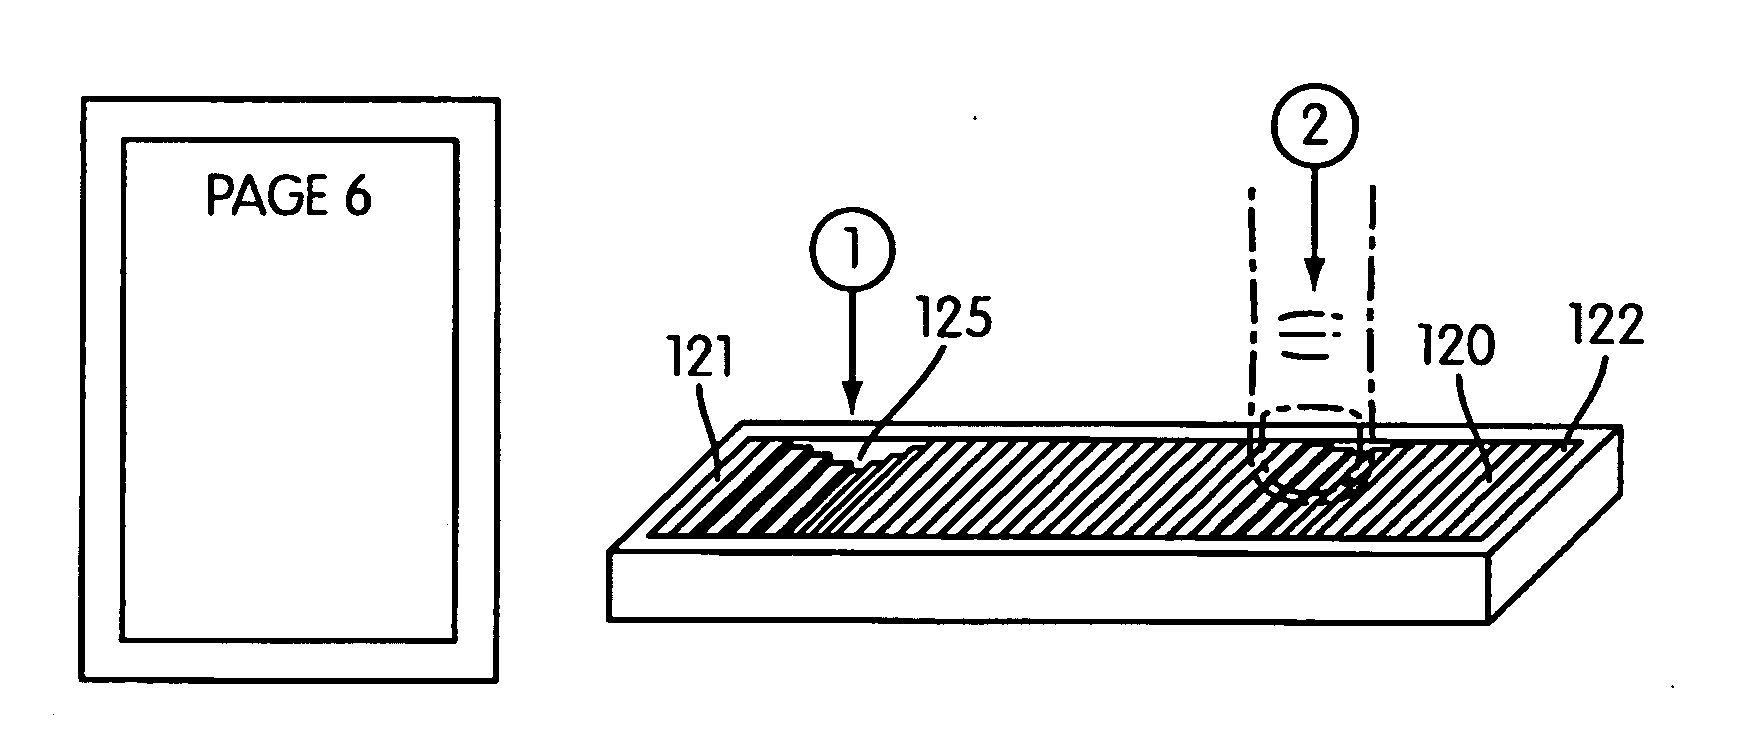 Tactile scroll bar with illuminated document position indicator